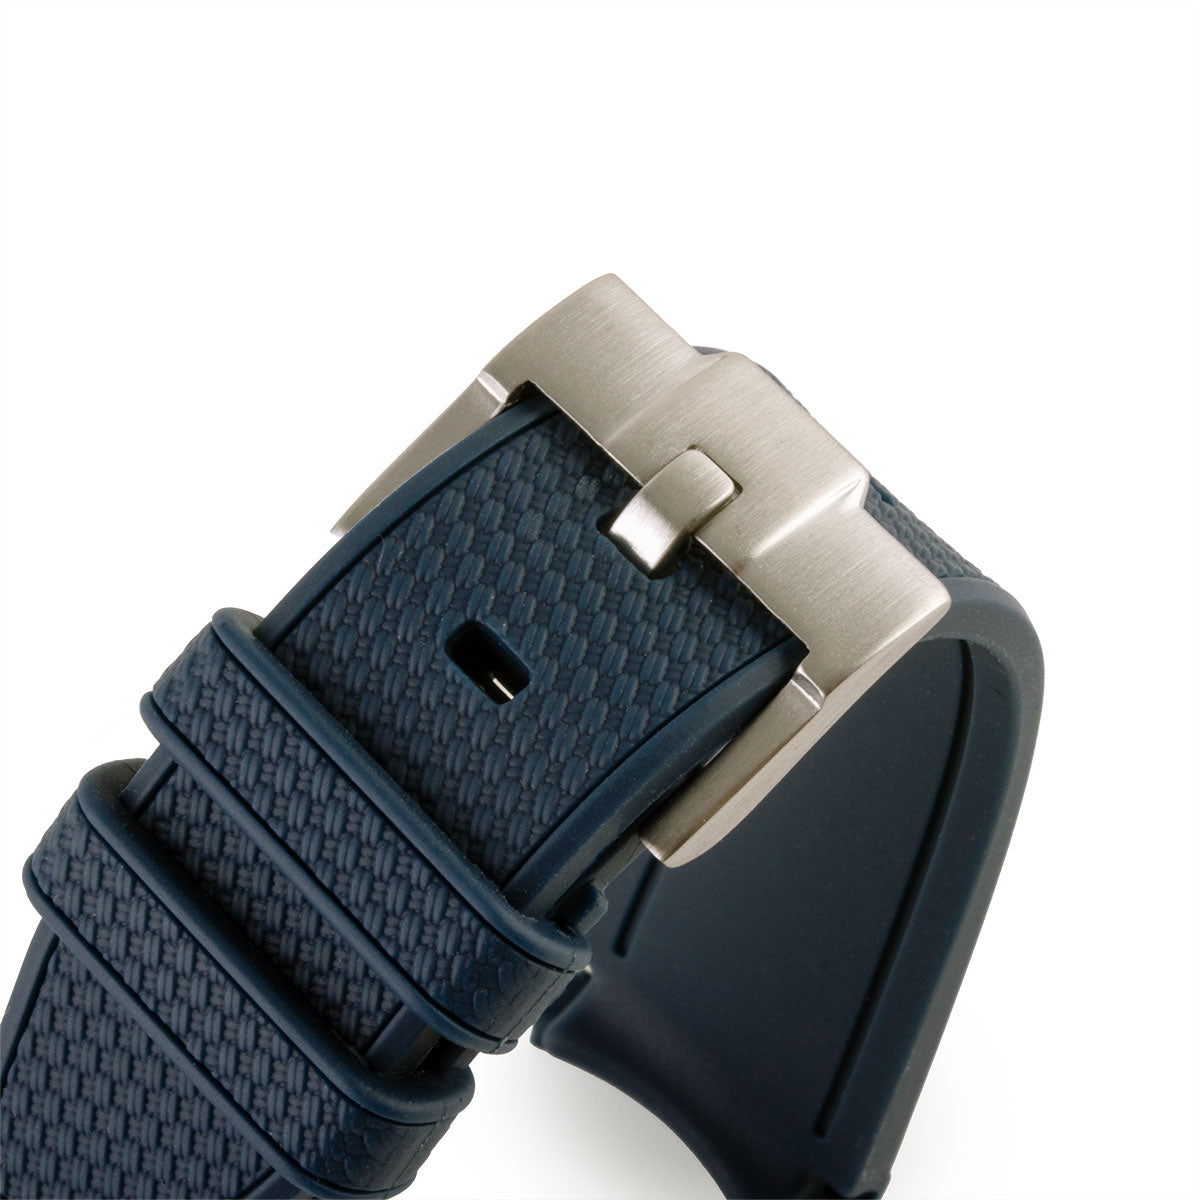 MoonSwatch Omega x Swatch - Integrated rubber watch band – ABP Concept